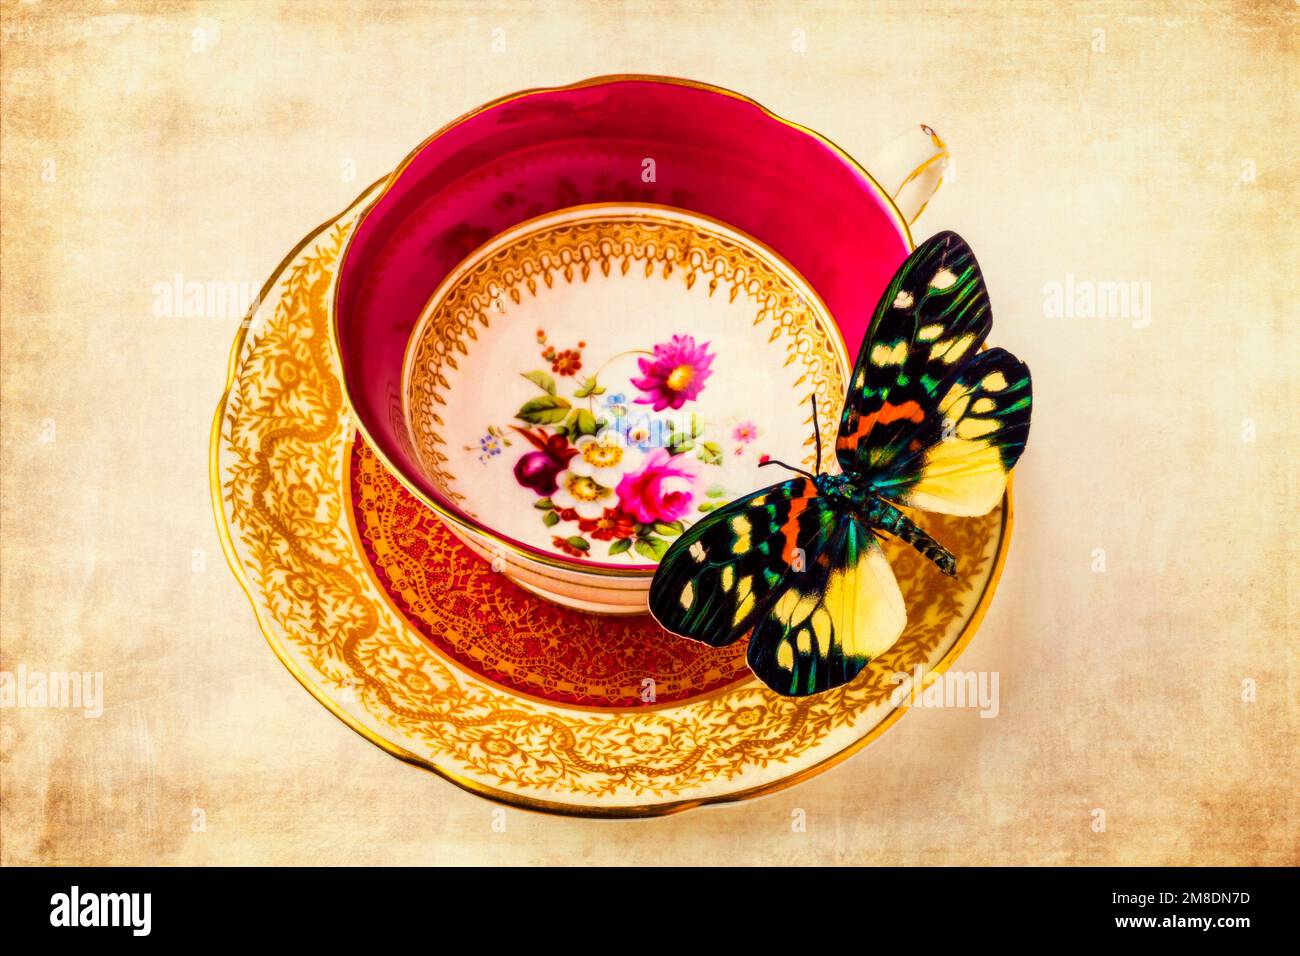 Butterfly Resting On Tea Cup Stock Photo